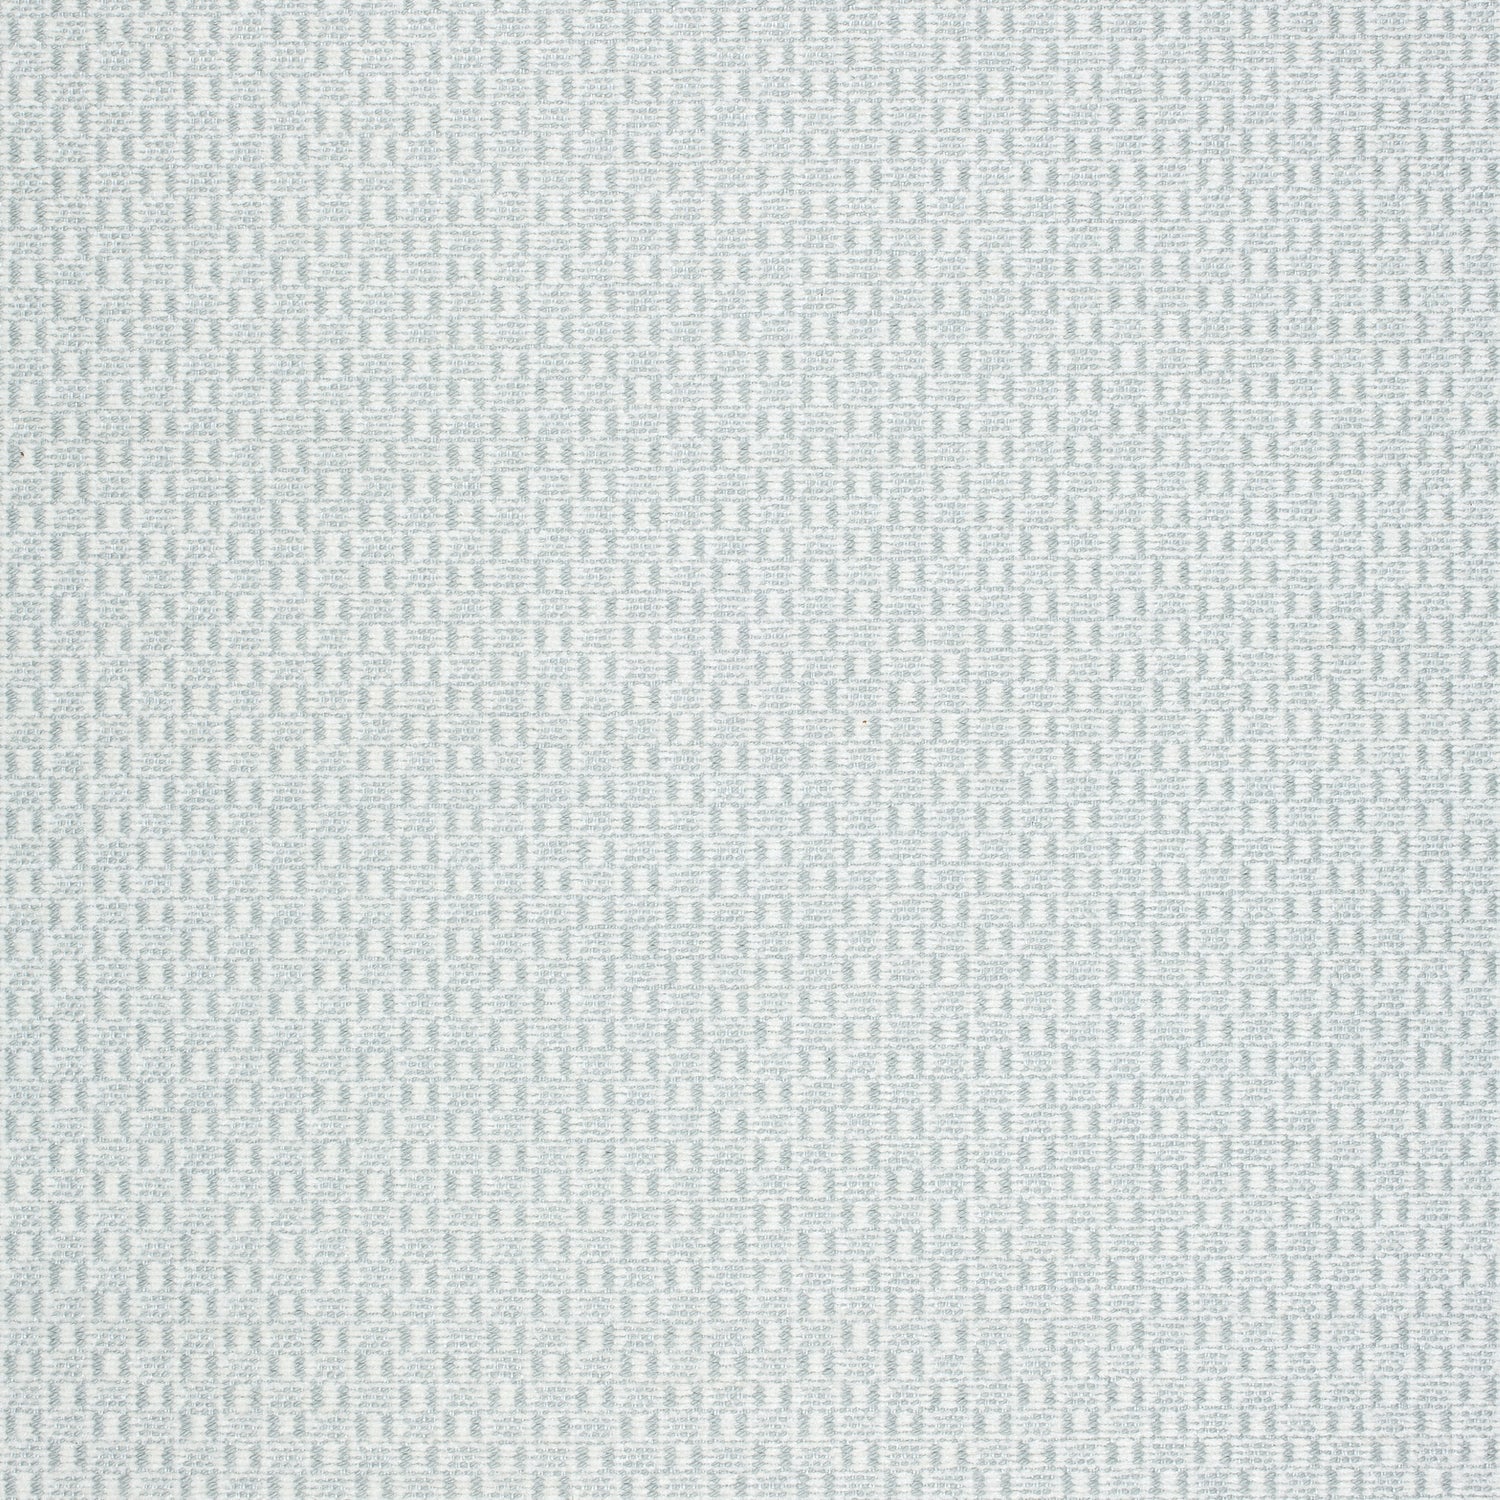 Emilie fabric in mineral color - pattern number W789141 - by Thibaut in the Reverie collection